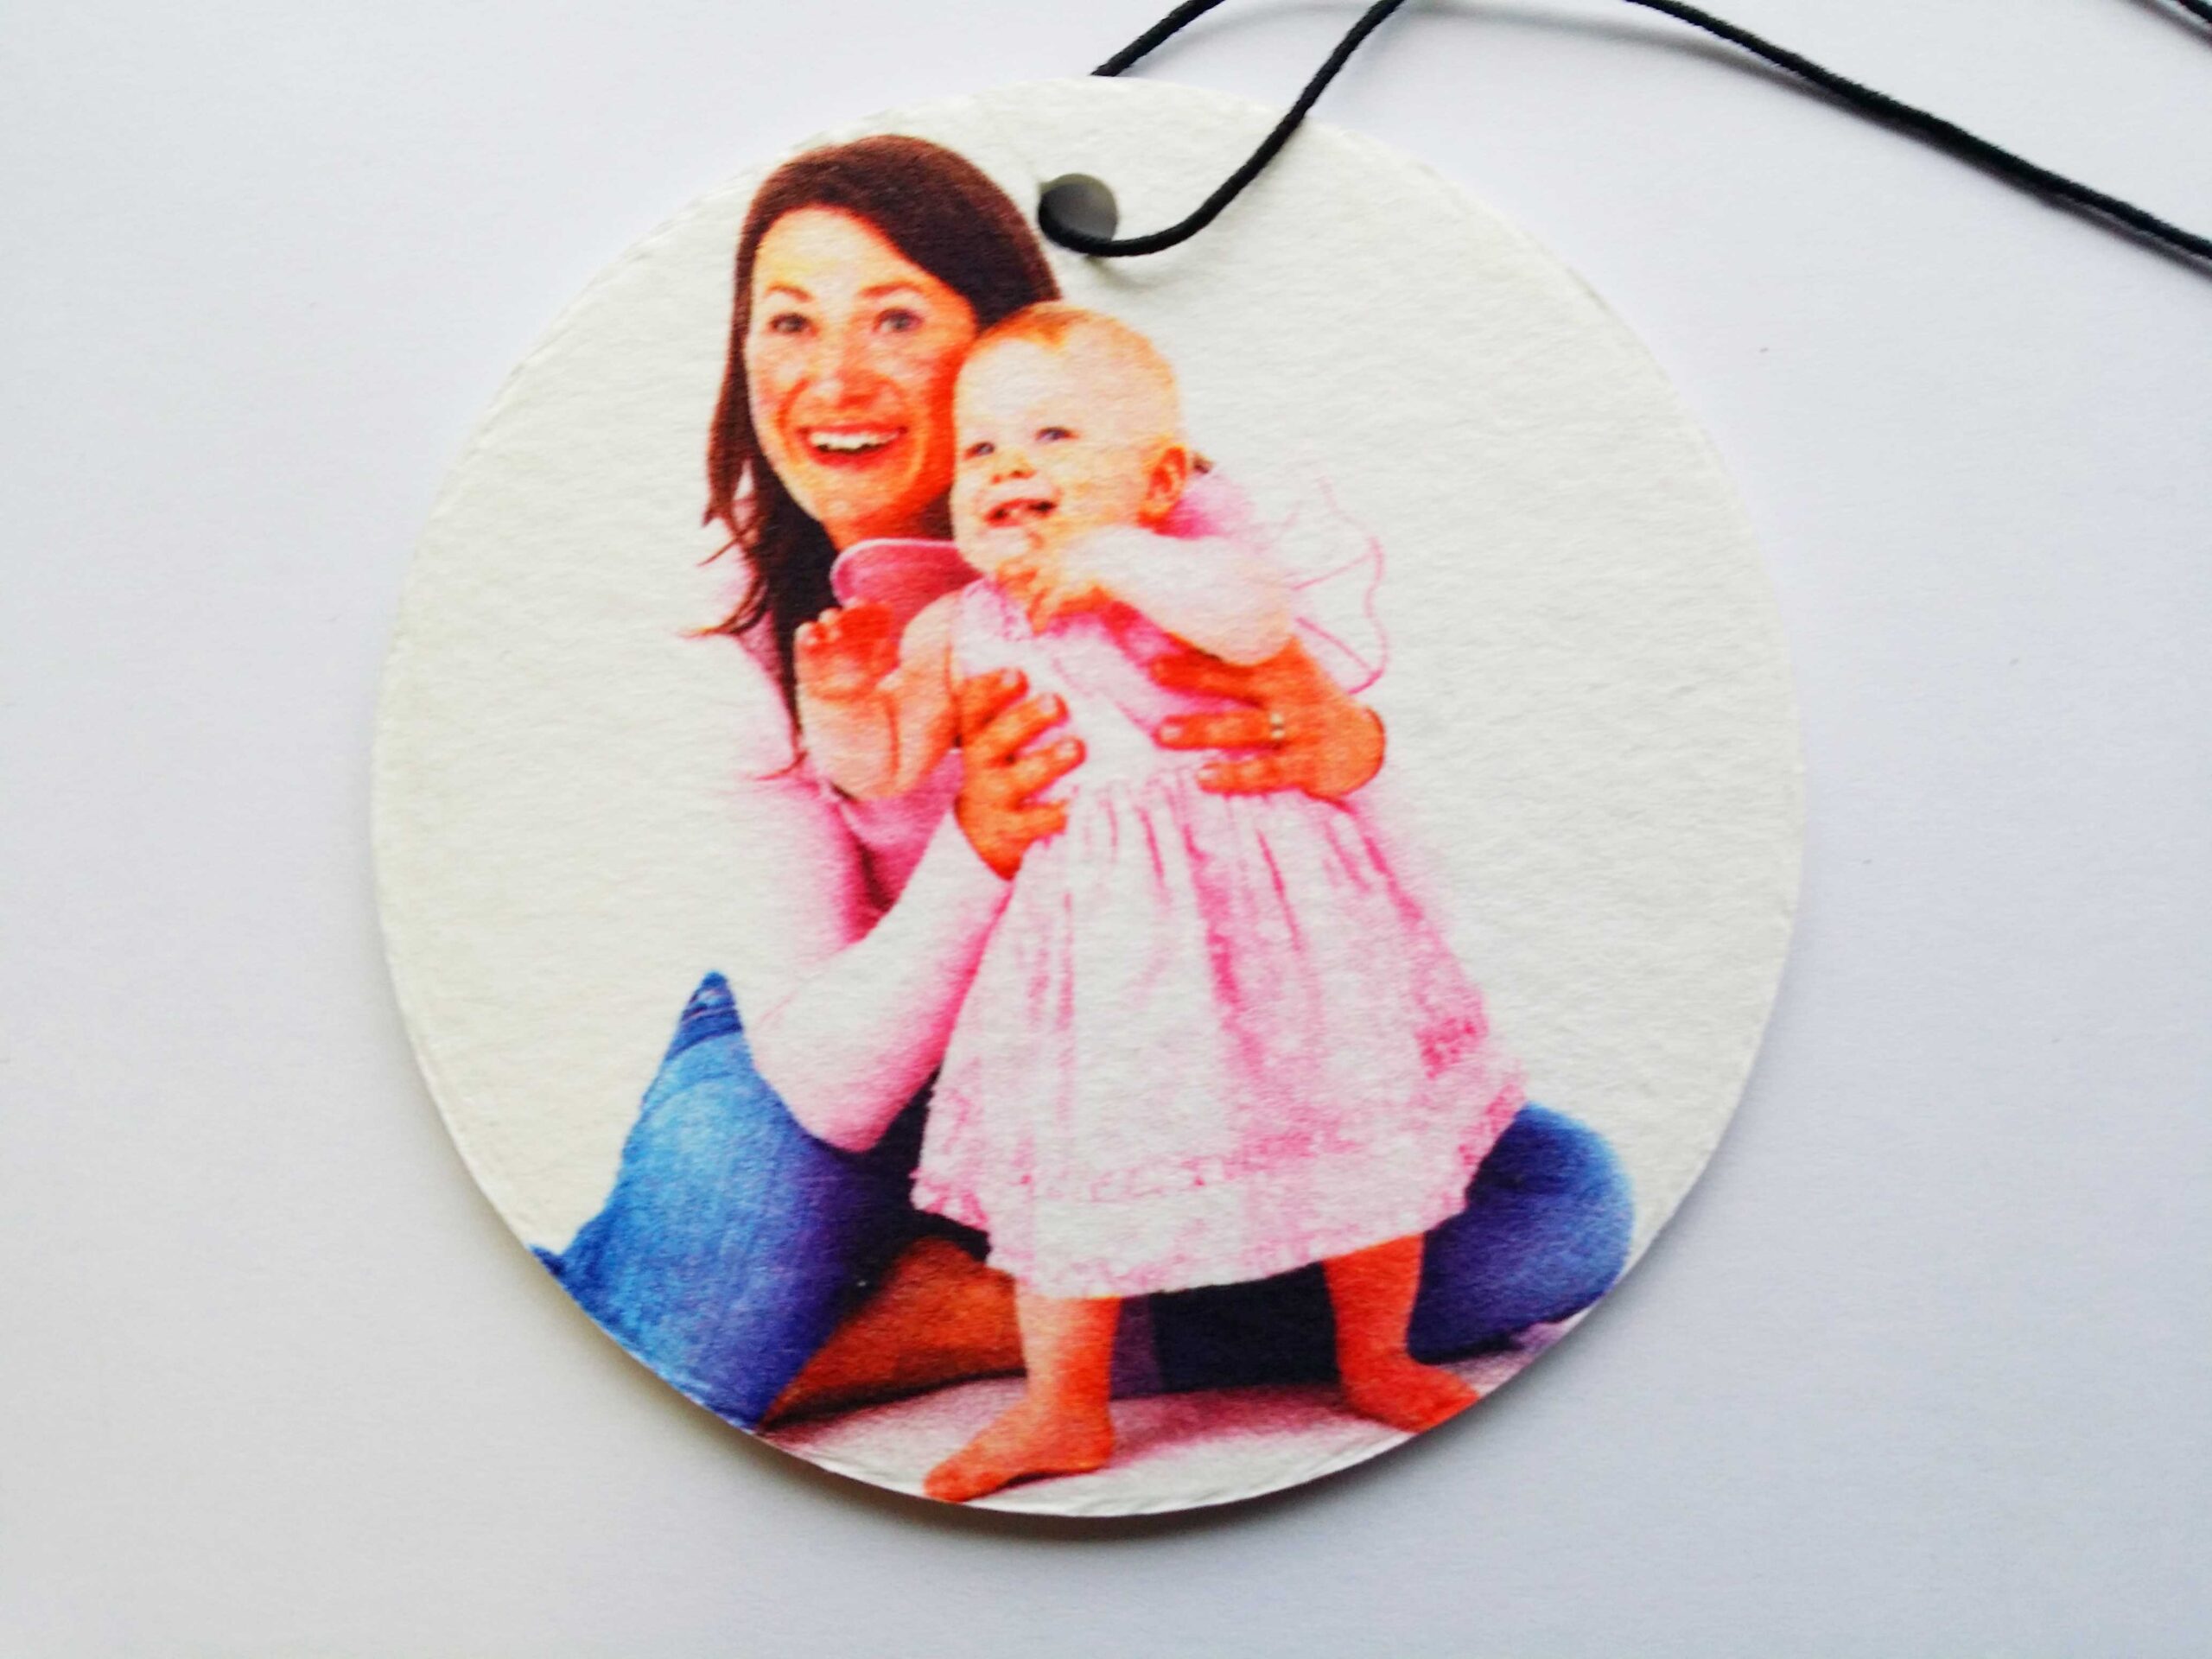 Your Picture On Circular Air Freshener